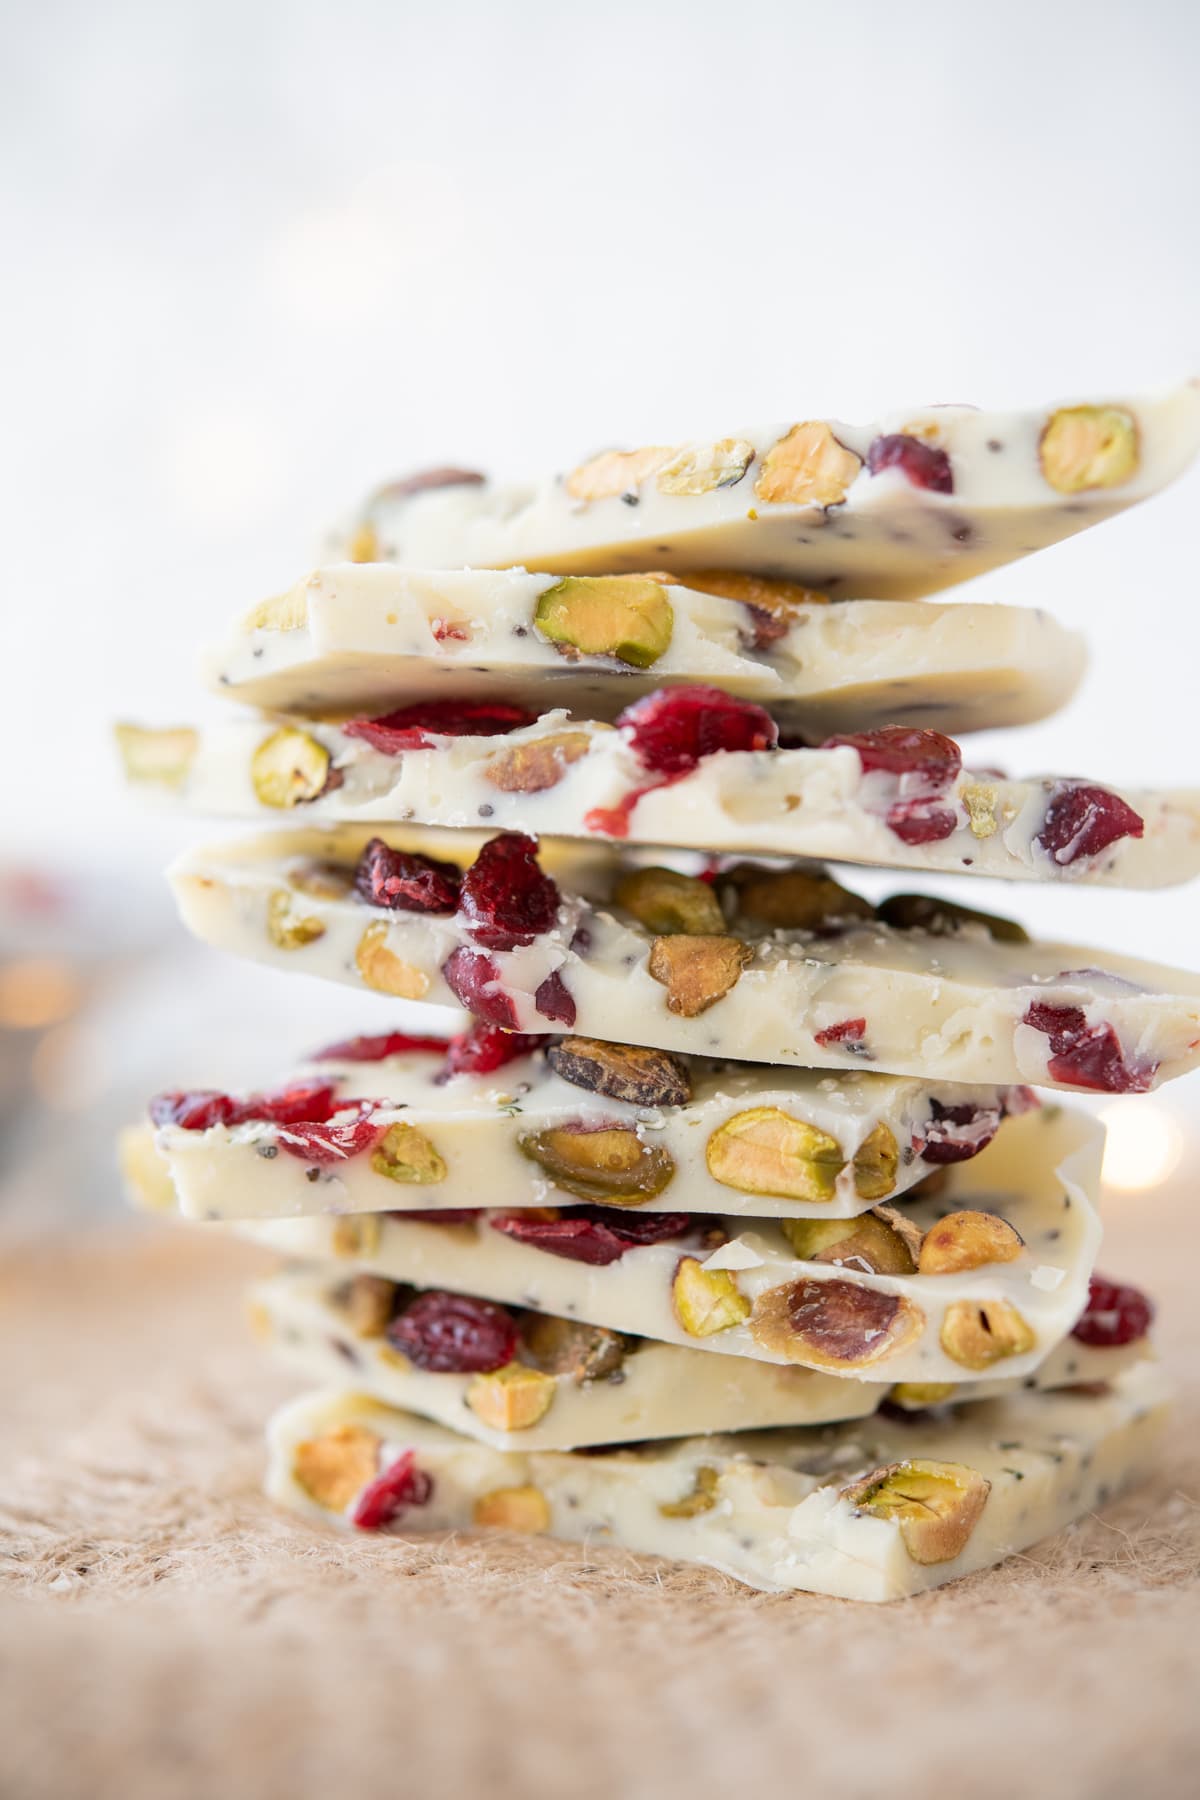 close up of white chocolate bark with nuts, seeds, and cranberries piled high